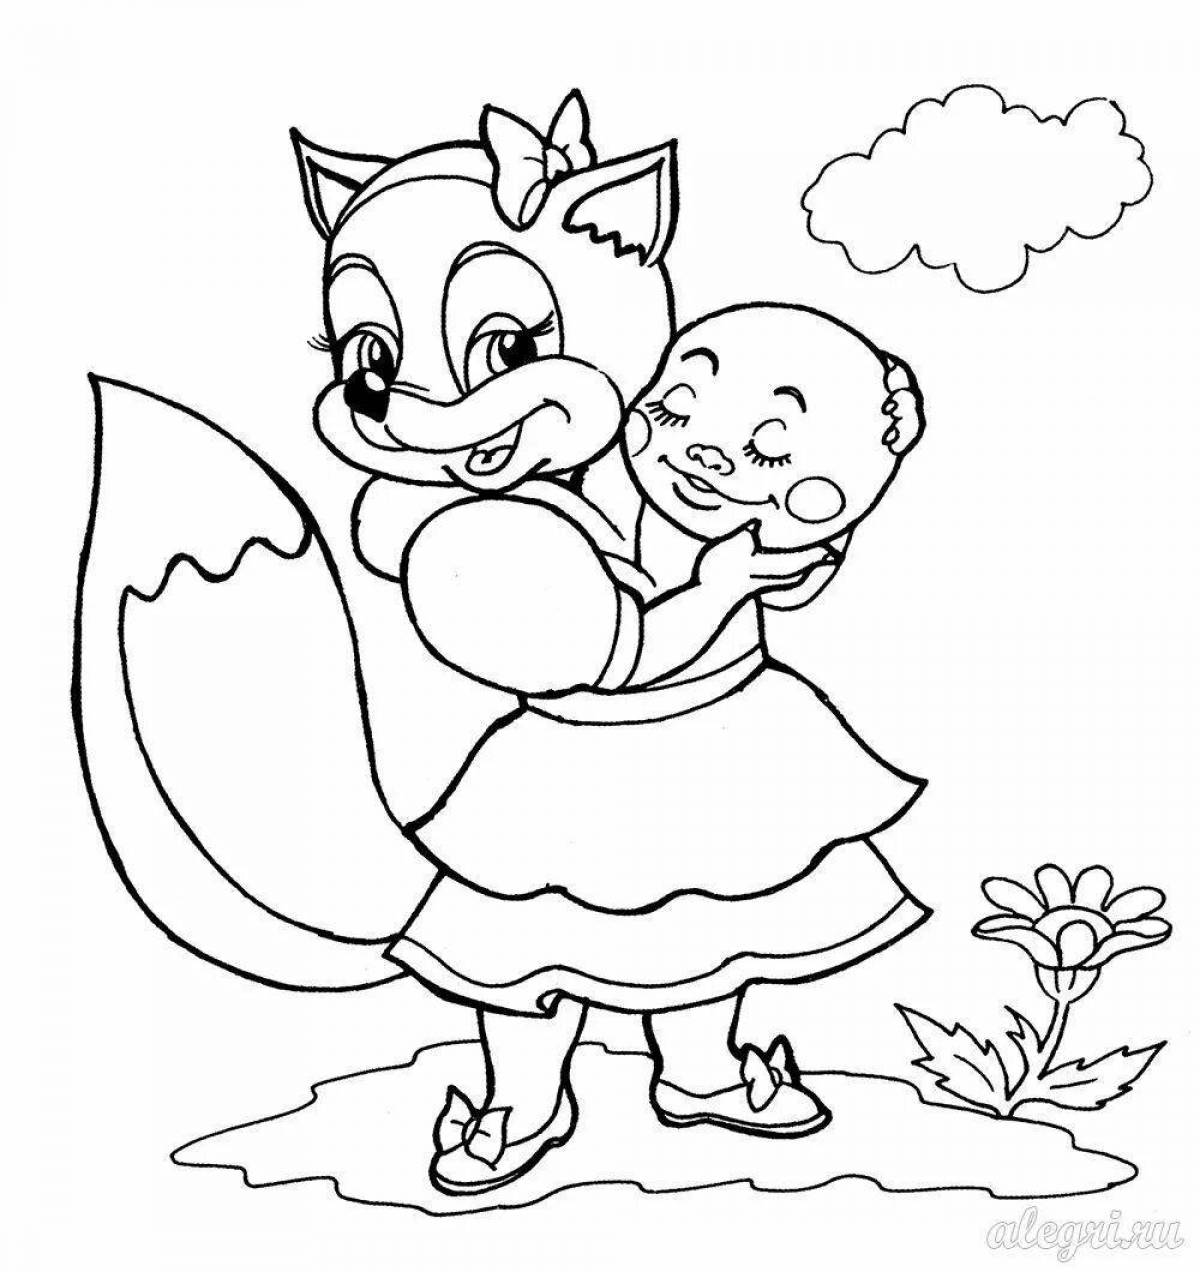 Living fox and rabbit coloring book